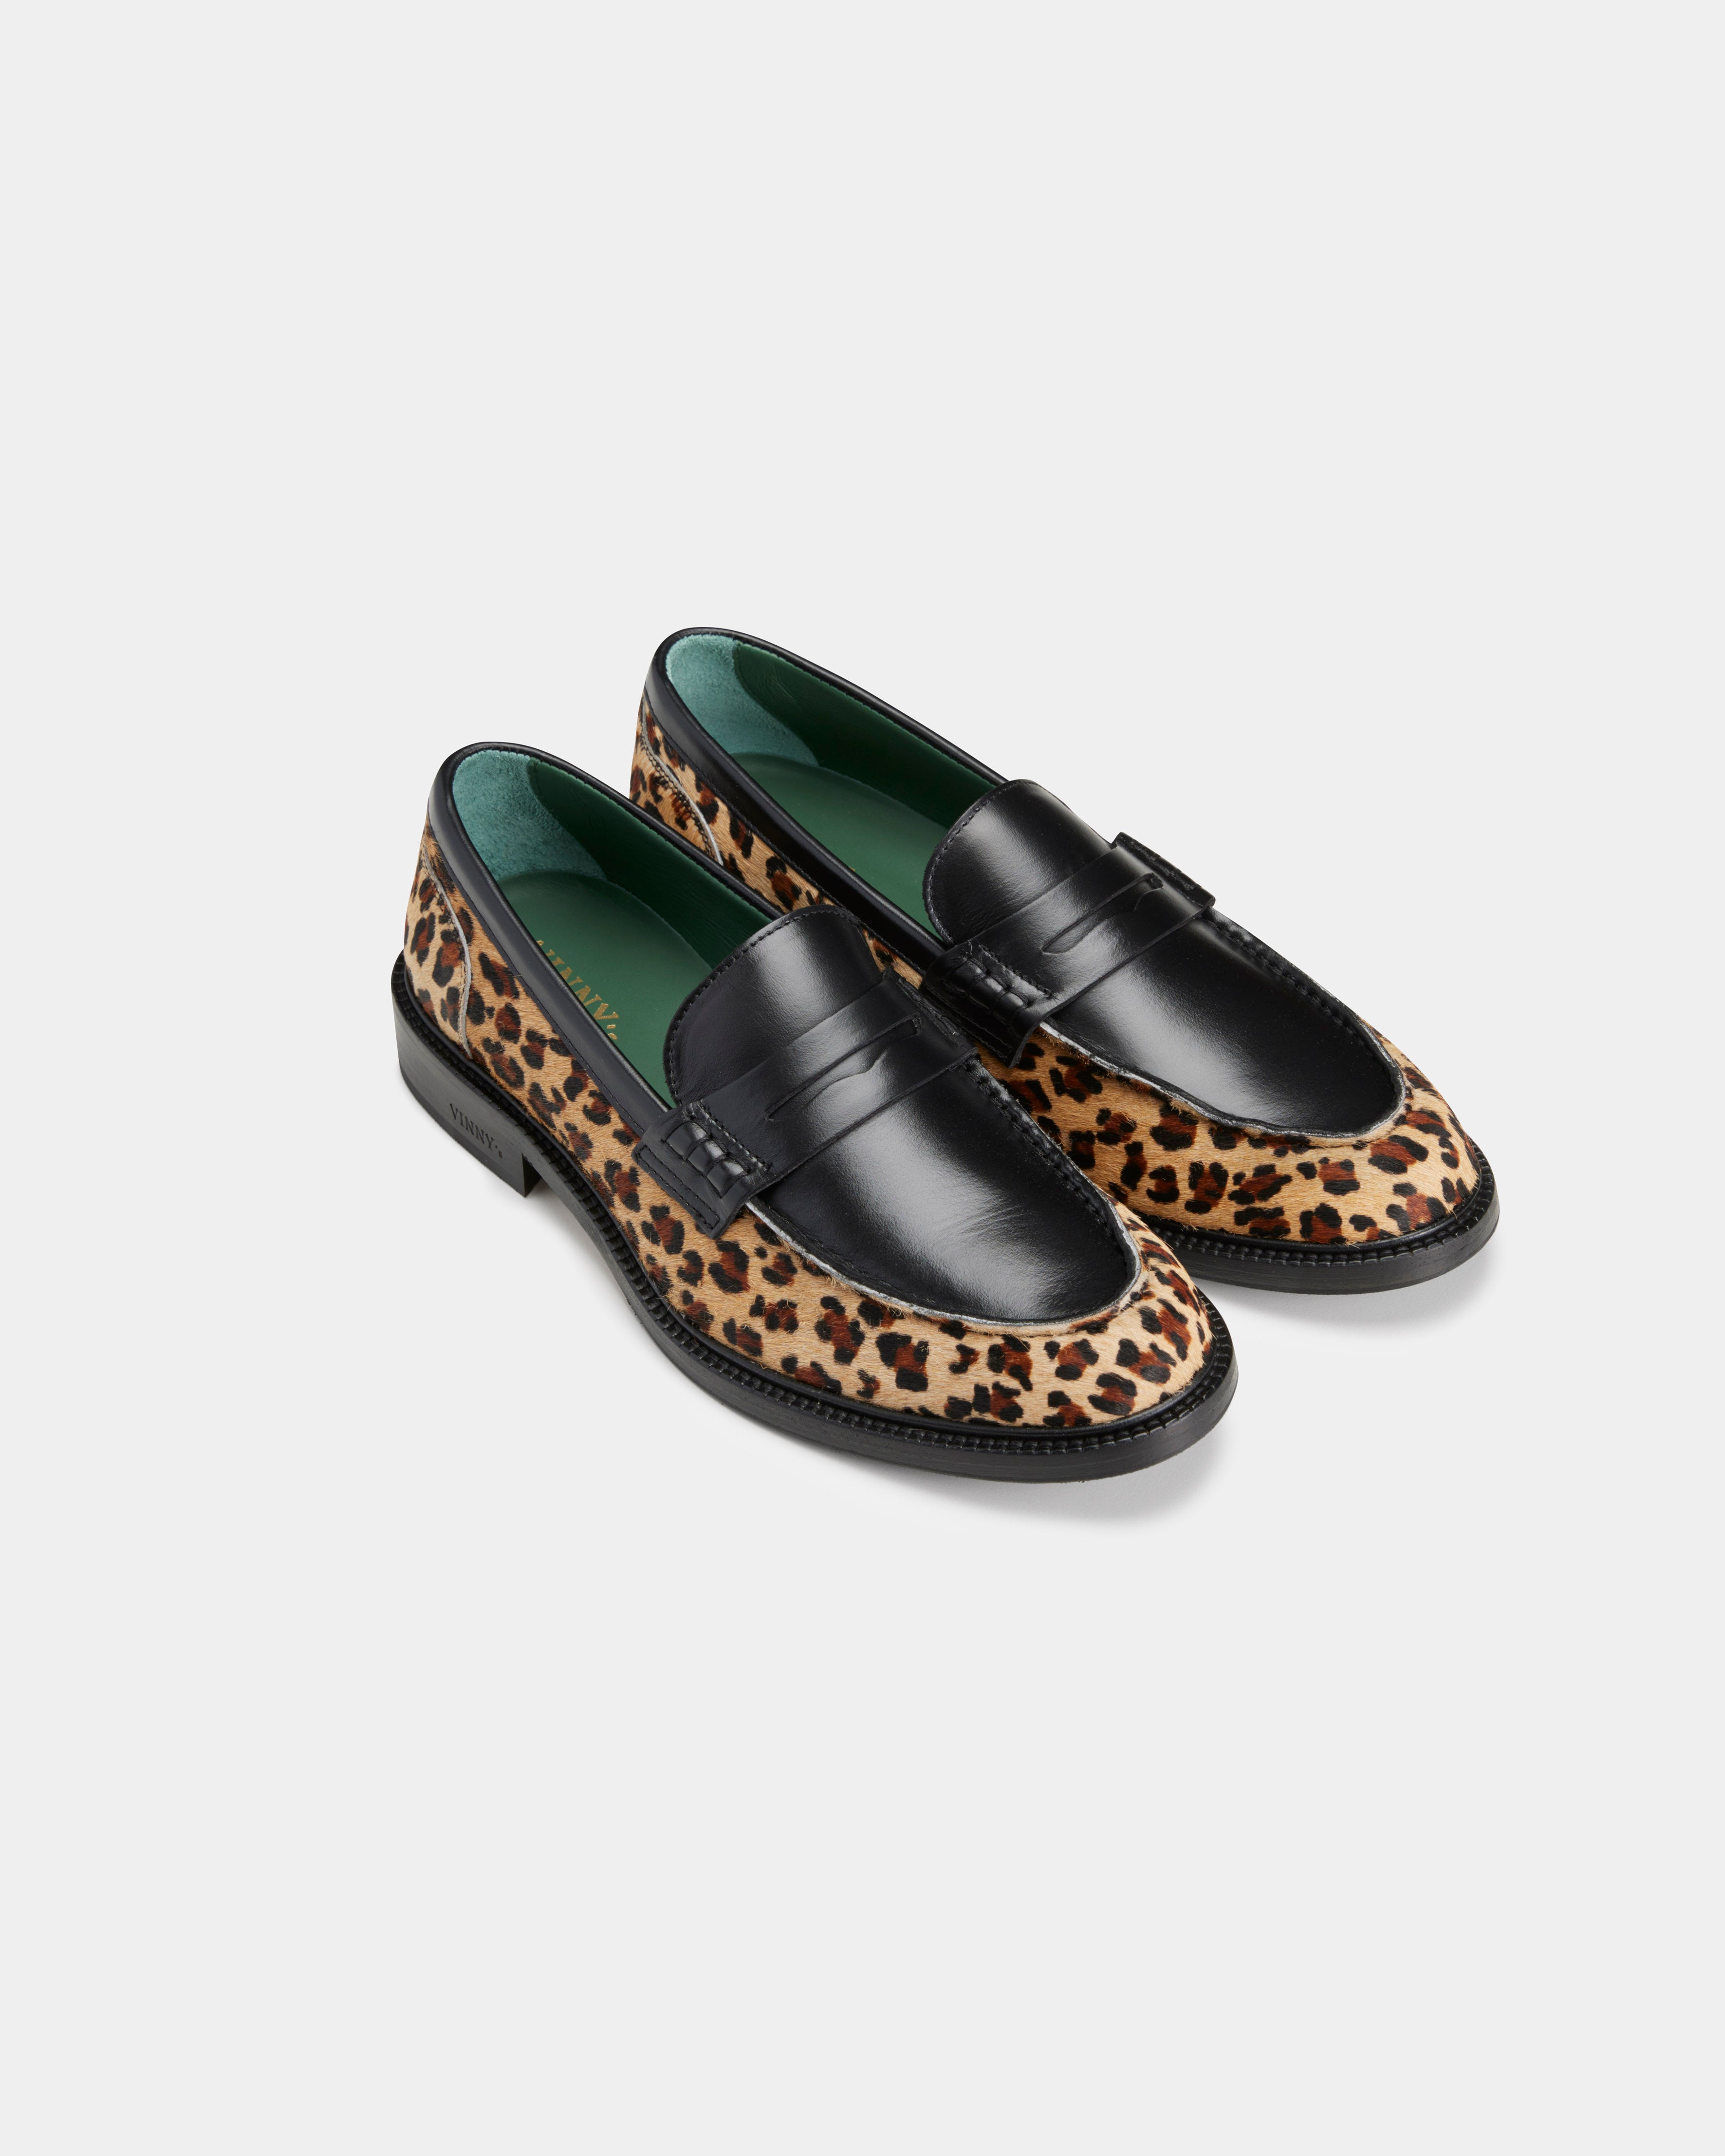 https://vinnysthevibe.com/products/townee-penny-loafer-44